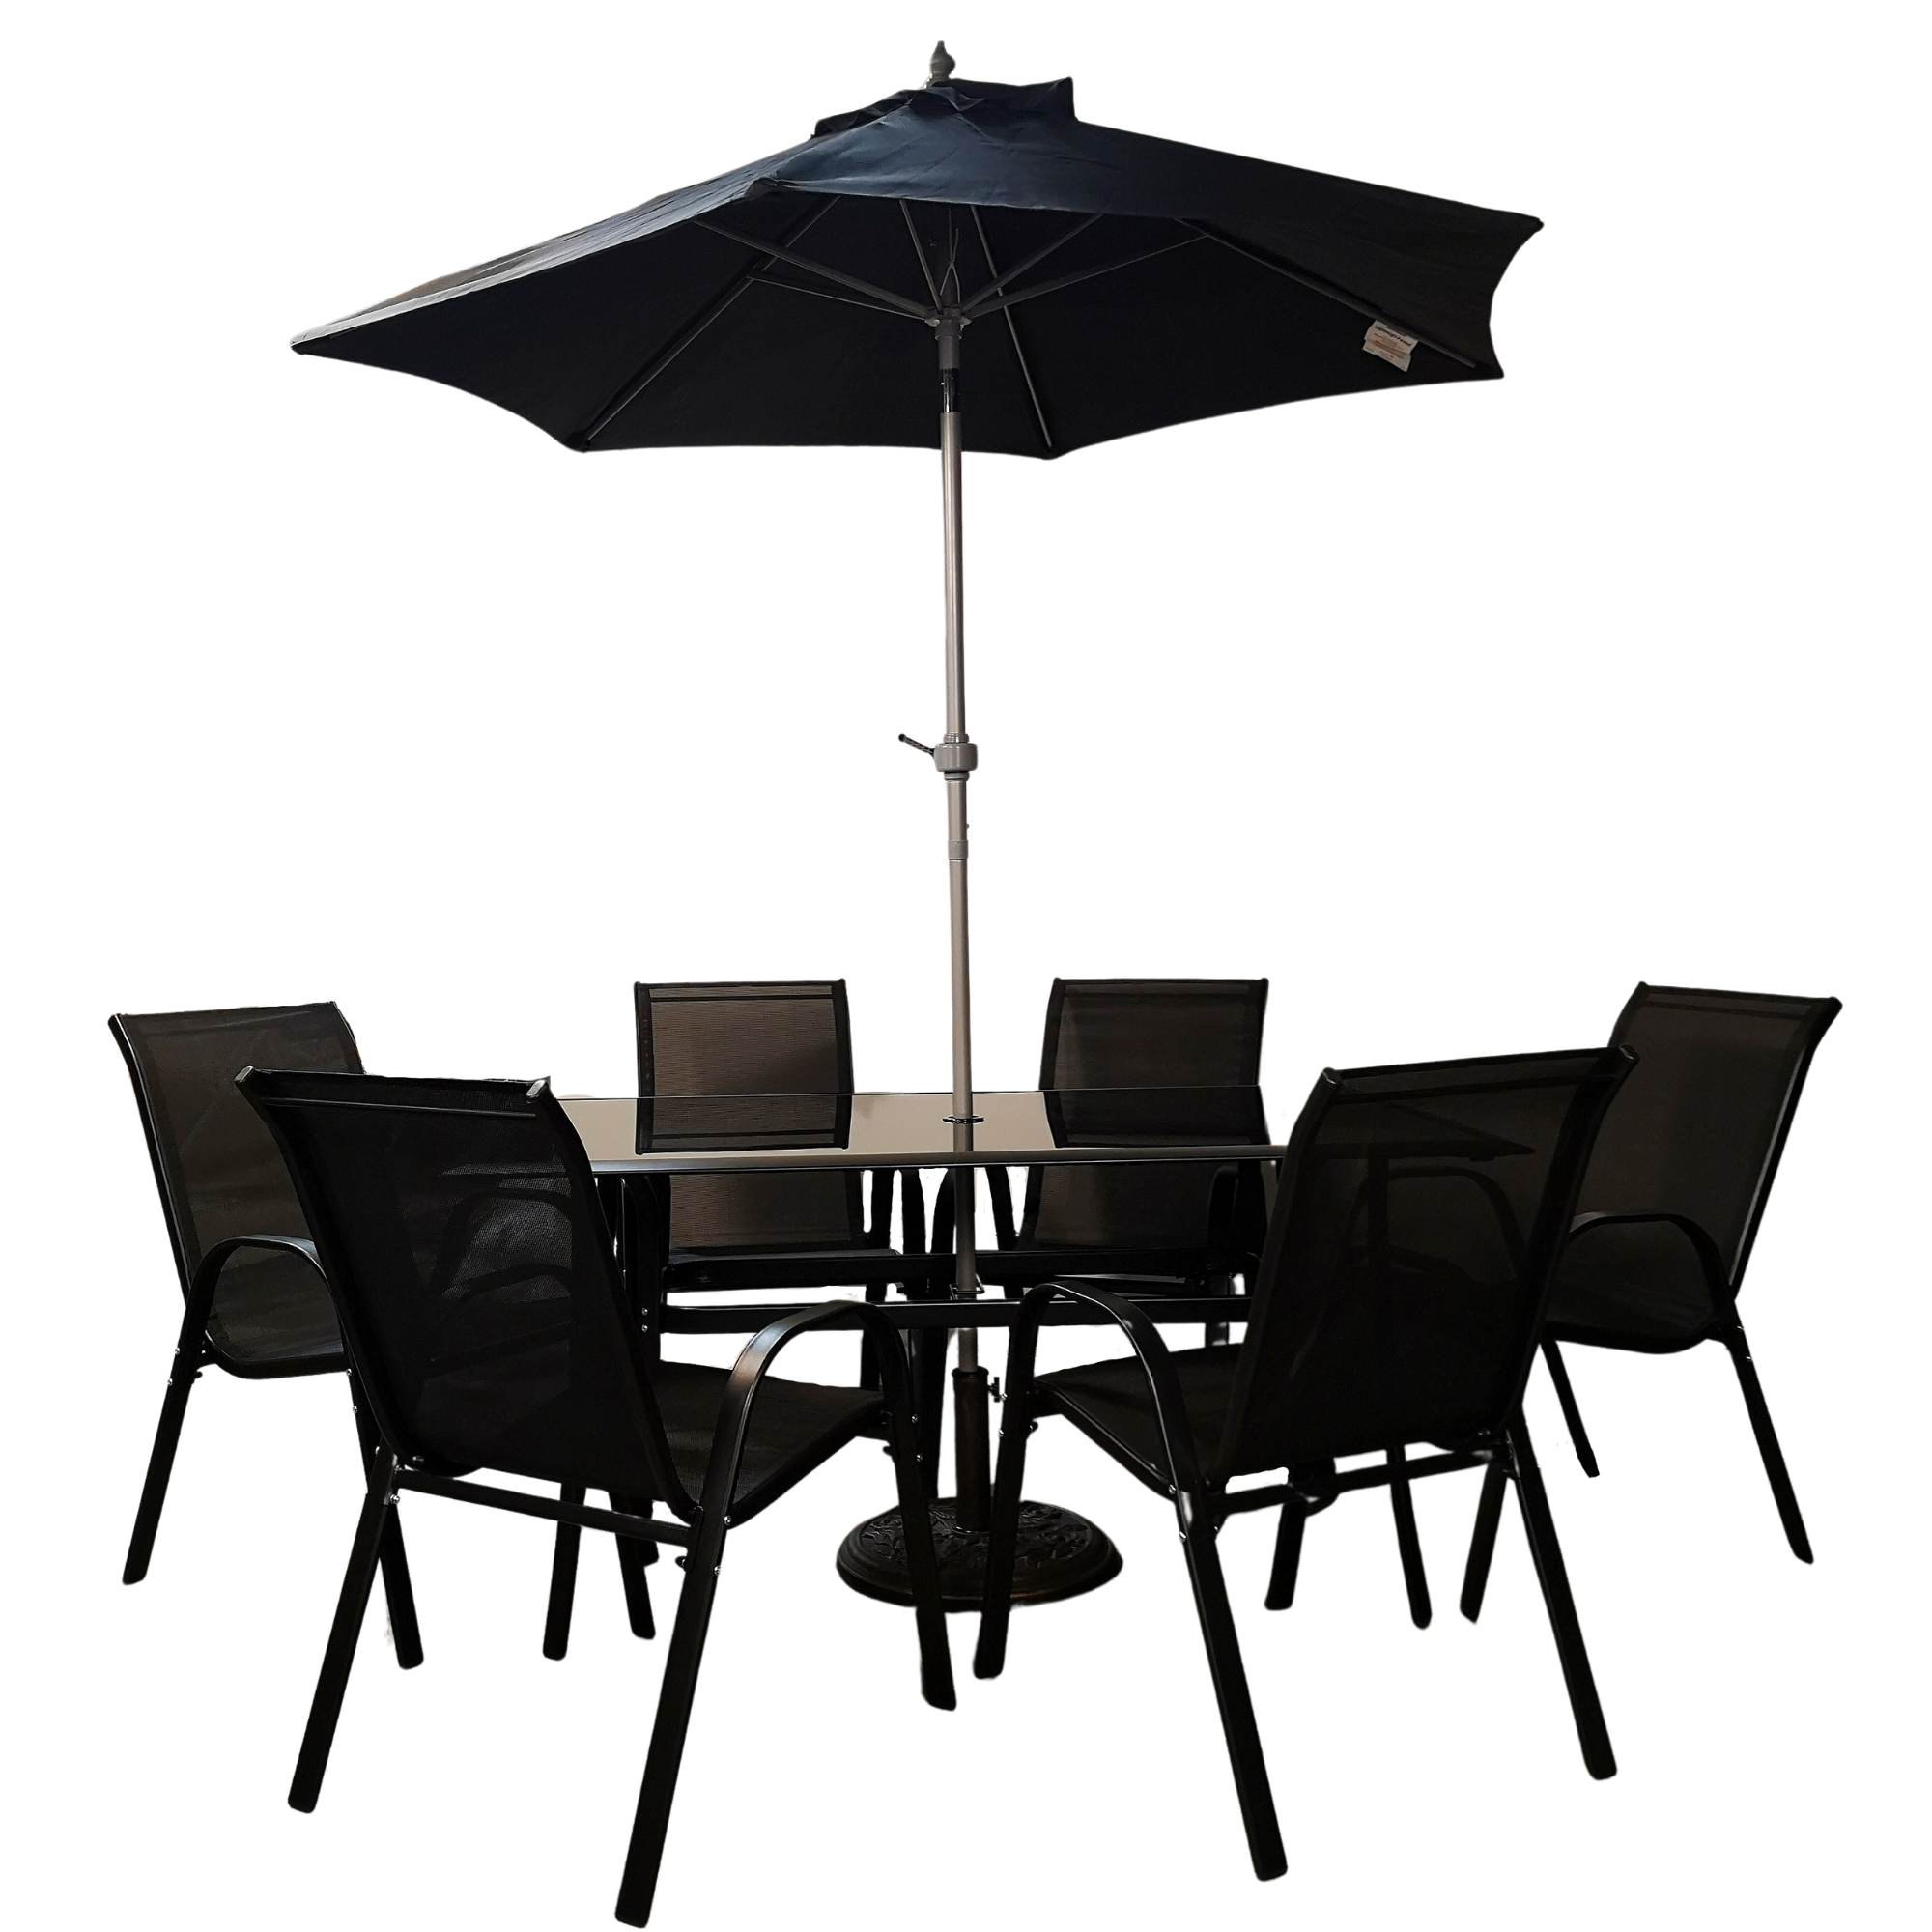 Outdoor 6 Person Rectangular Glass Top Garden Patio Dining Table Chairs With Black Parasol and Base Set